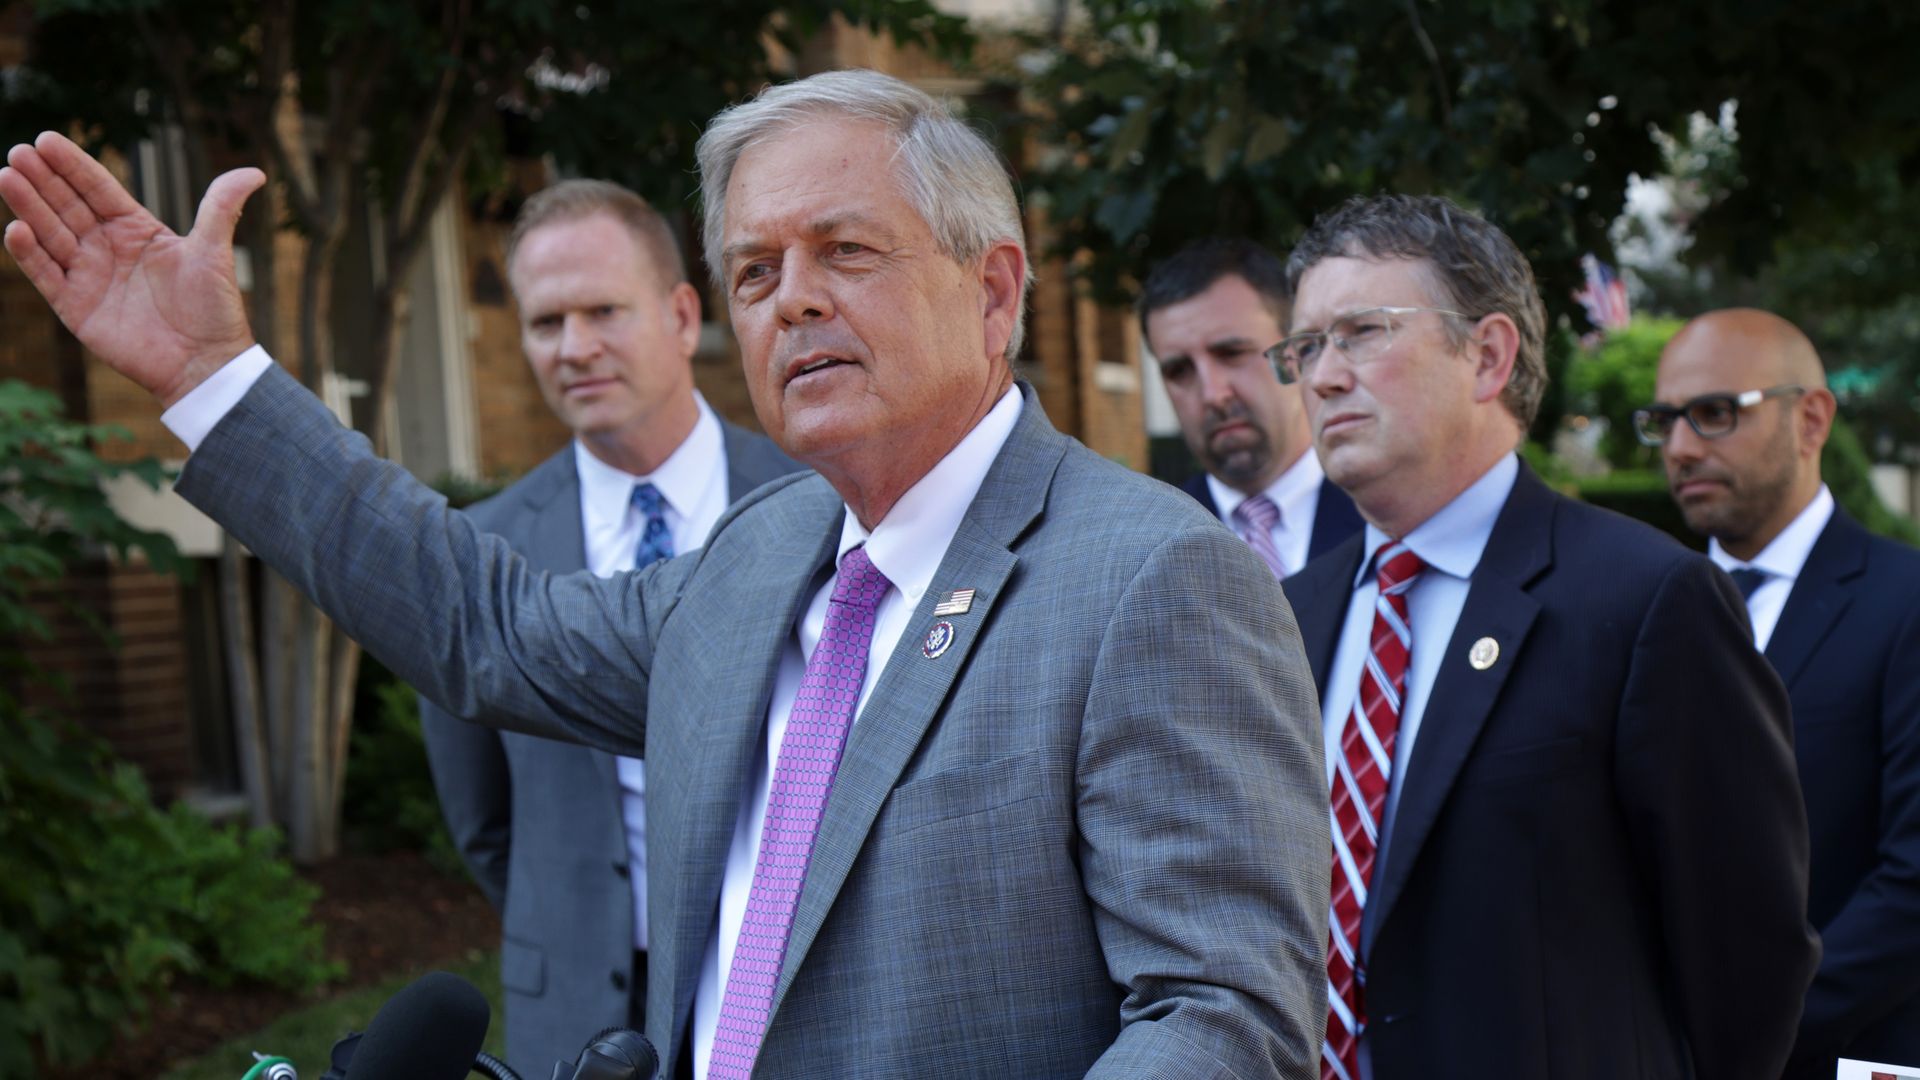 Reps. Ralph Norman (R-S.C.), wearing a gray suit; white shirt; and purple tie, and Thomas Massie (R-Ky.), wearing a blue suit; blue shirt and red tie, speak at an outdoor press conference.